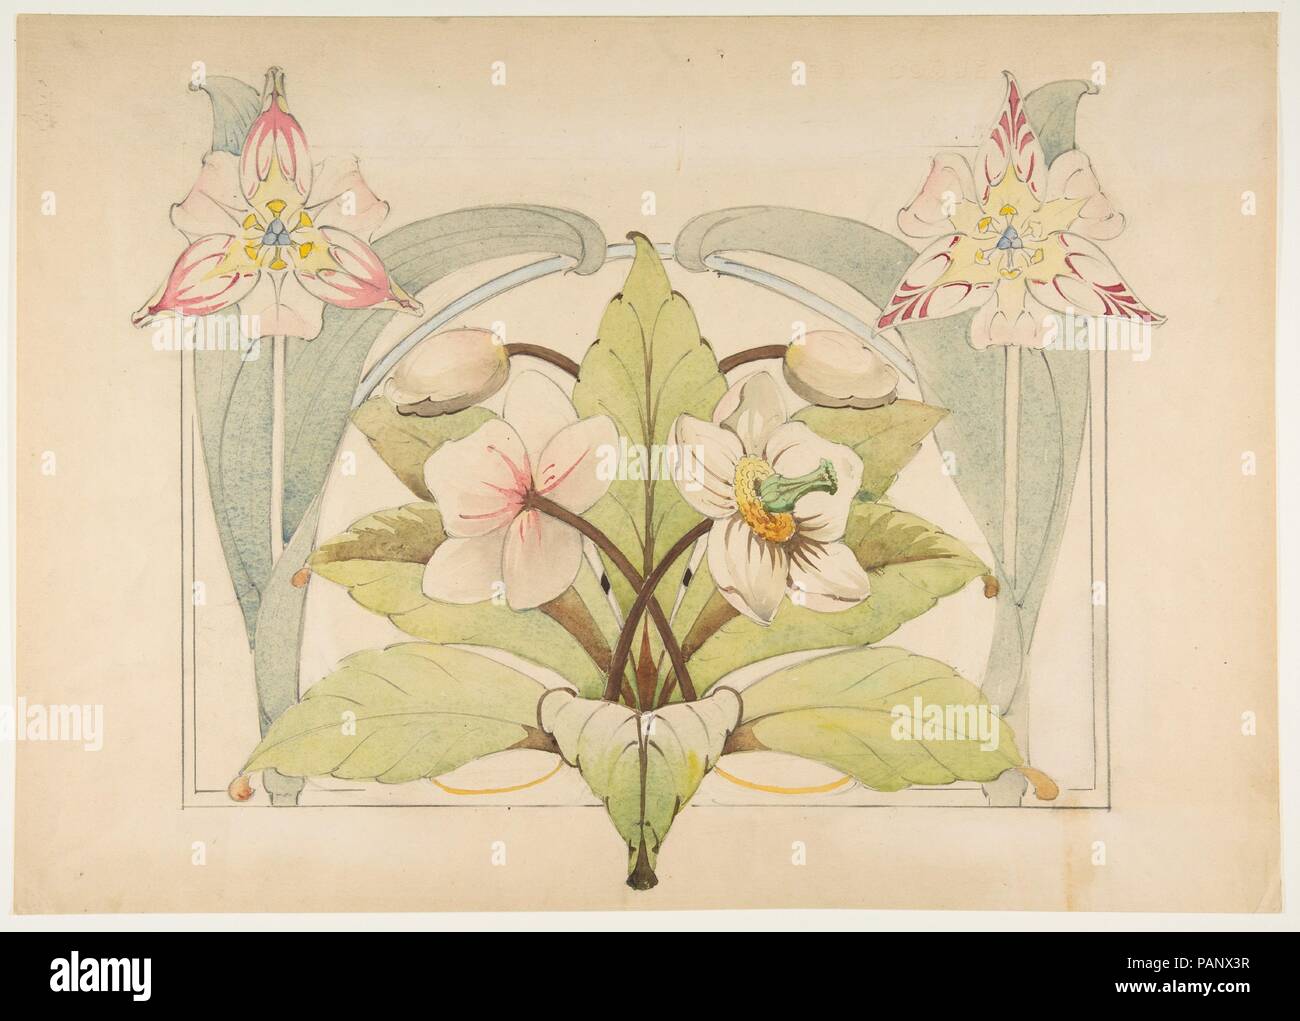 Design with Flowers. Artist: Anonymous, French, 19th century. Dimensions: 13 3/16 x 18 11/16 in. (33.5 x 47.5 cm). Date: 19th century. Museum: Metropolitan Museum of Art, New York, USA. Stock Photo